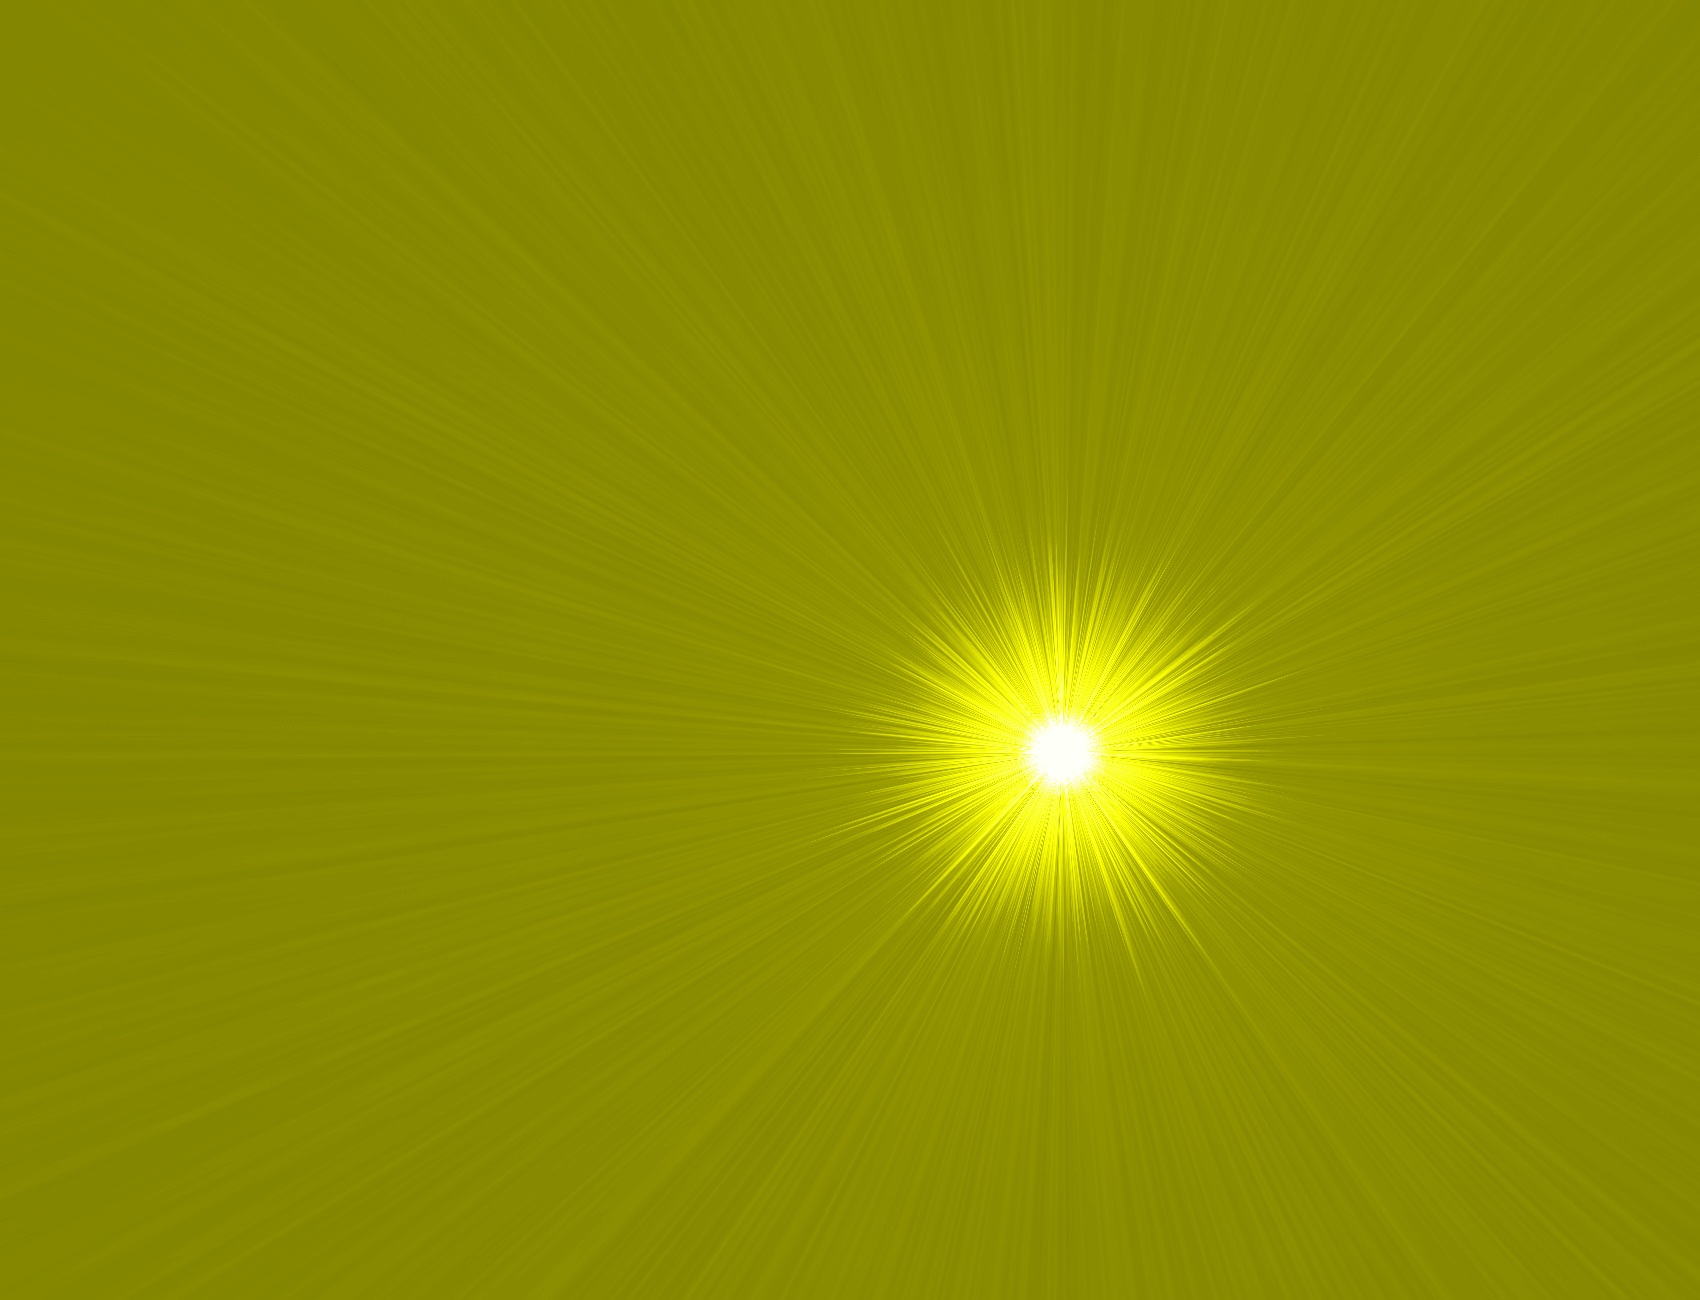 Abstract green wallpaper by esvb94 titled Sunshine.